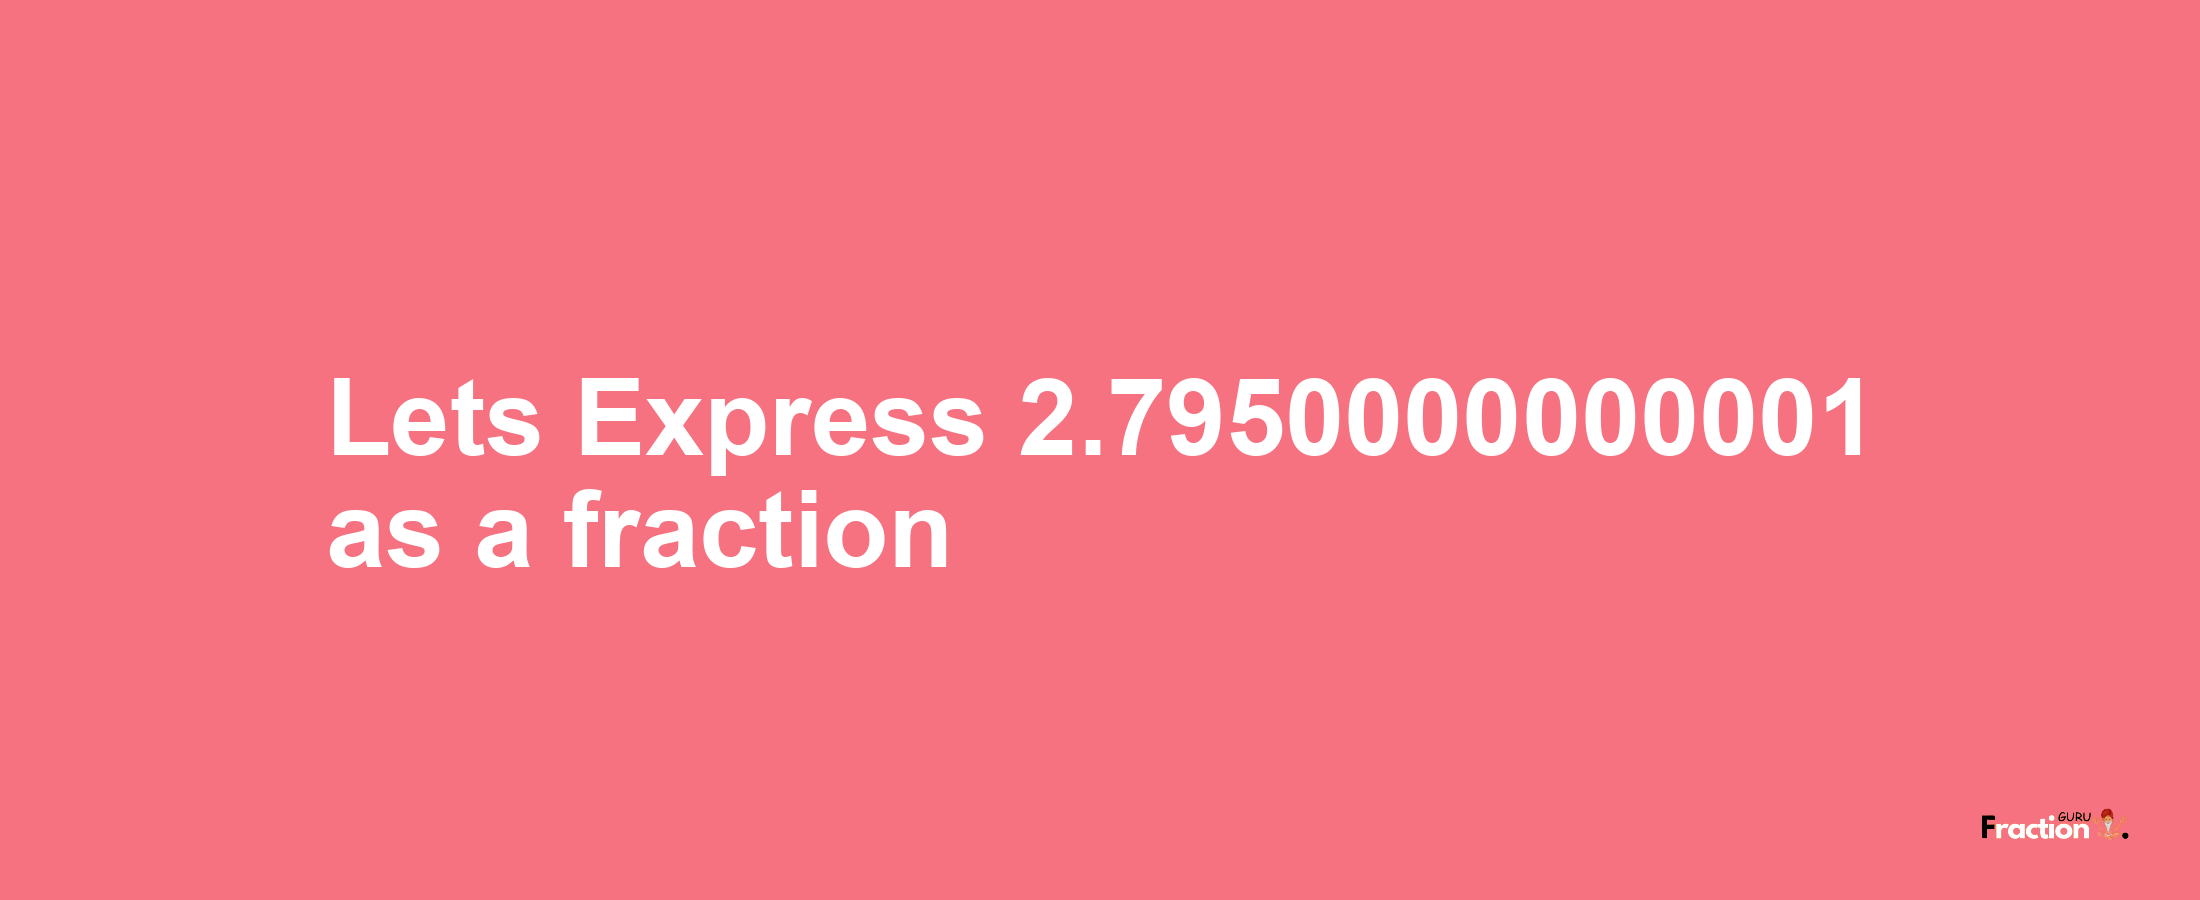 Lets Express 2.7950000000001 as afraction